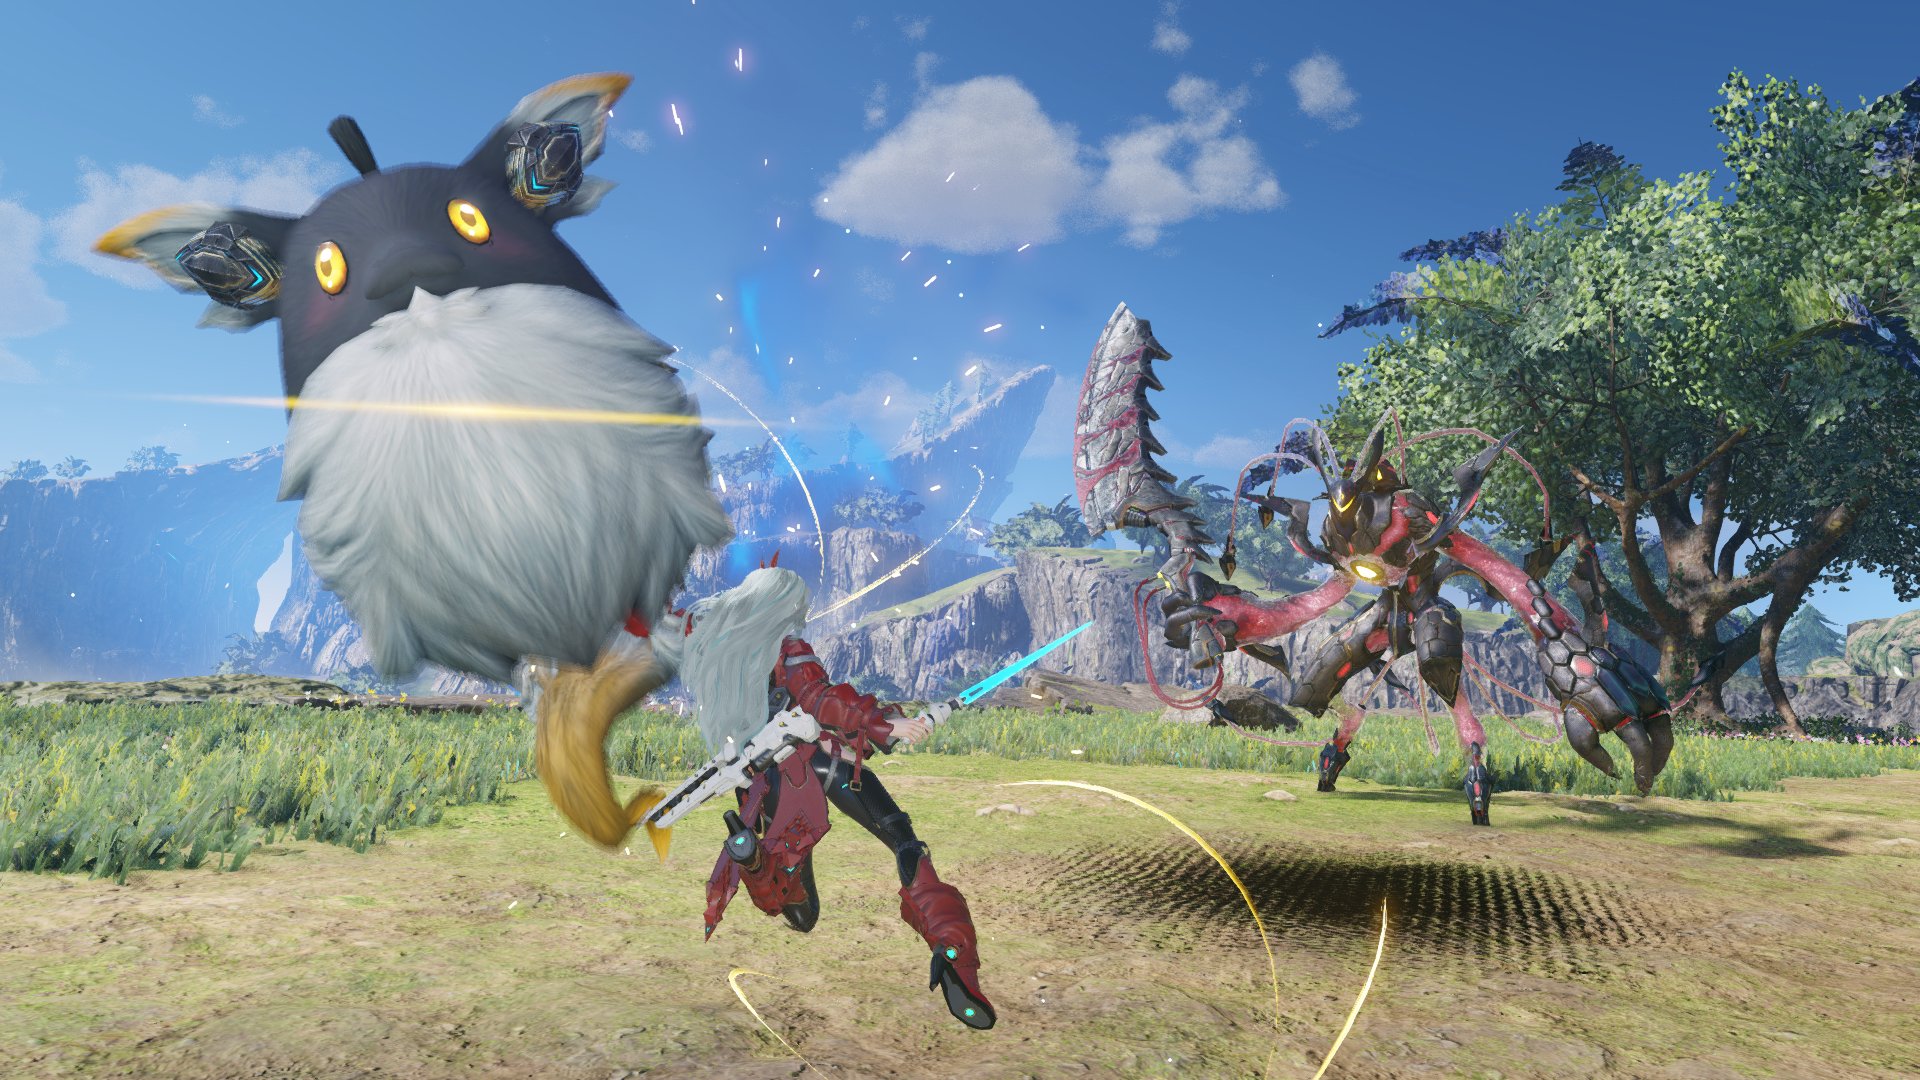 A New Class Wakes in Phantasy Star Online 2: New Genesis